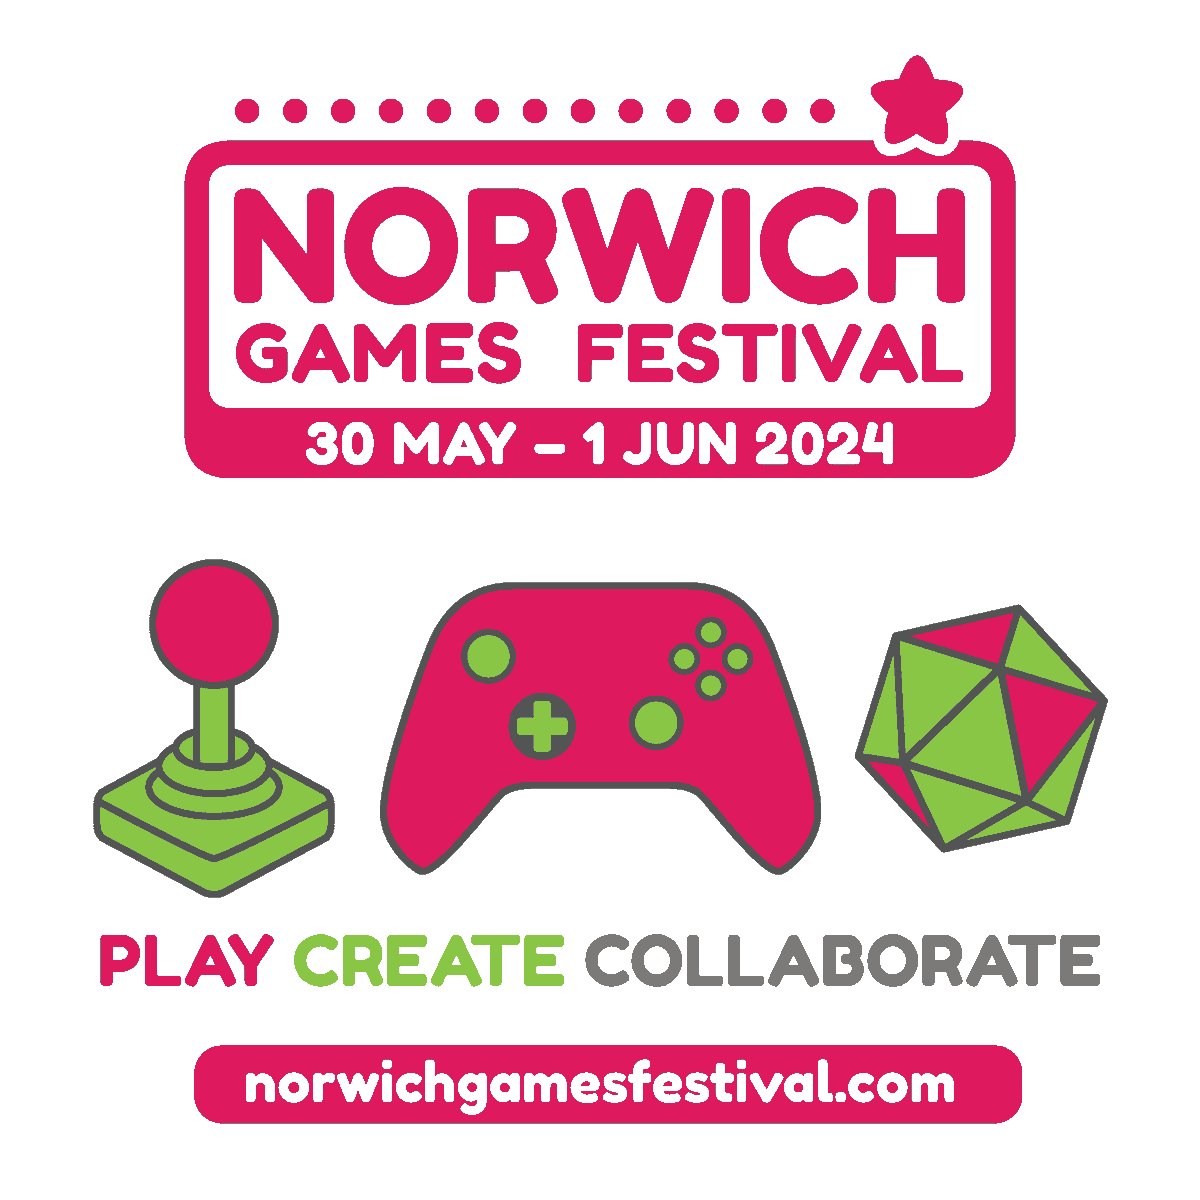 Back again with another event announcement! We will be showcasing FOQUES at the @NorwichGFest! We will be there on the 30th and 31st. Come say hello, grab some stickers and other merchandise, and best of all, play our demo! - Jack 🦊